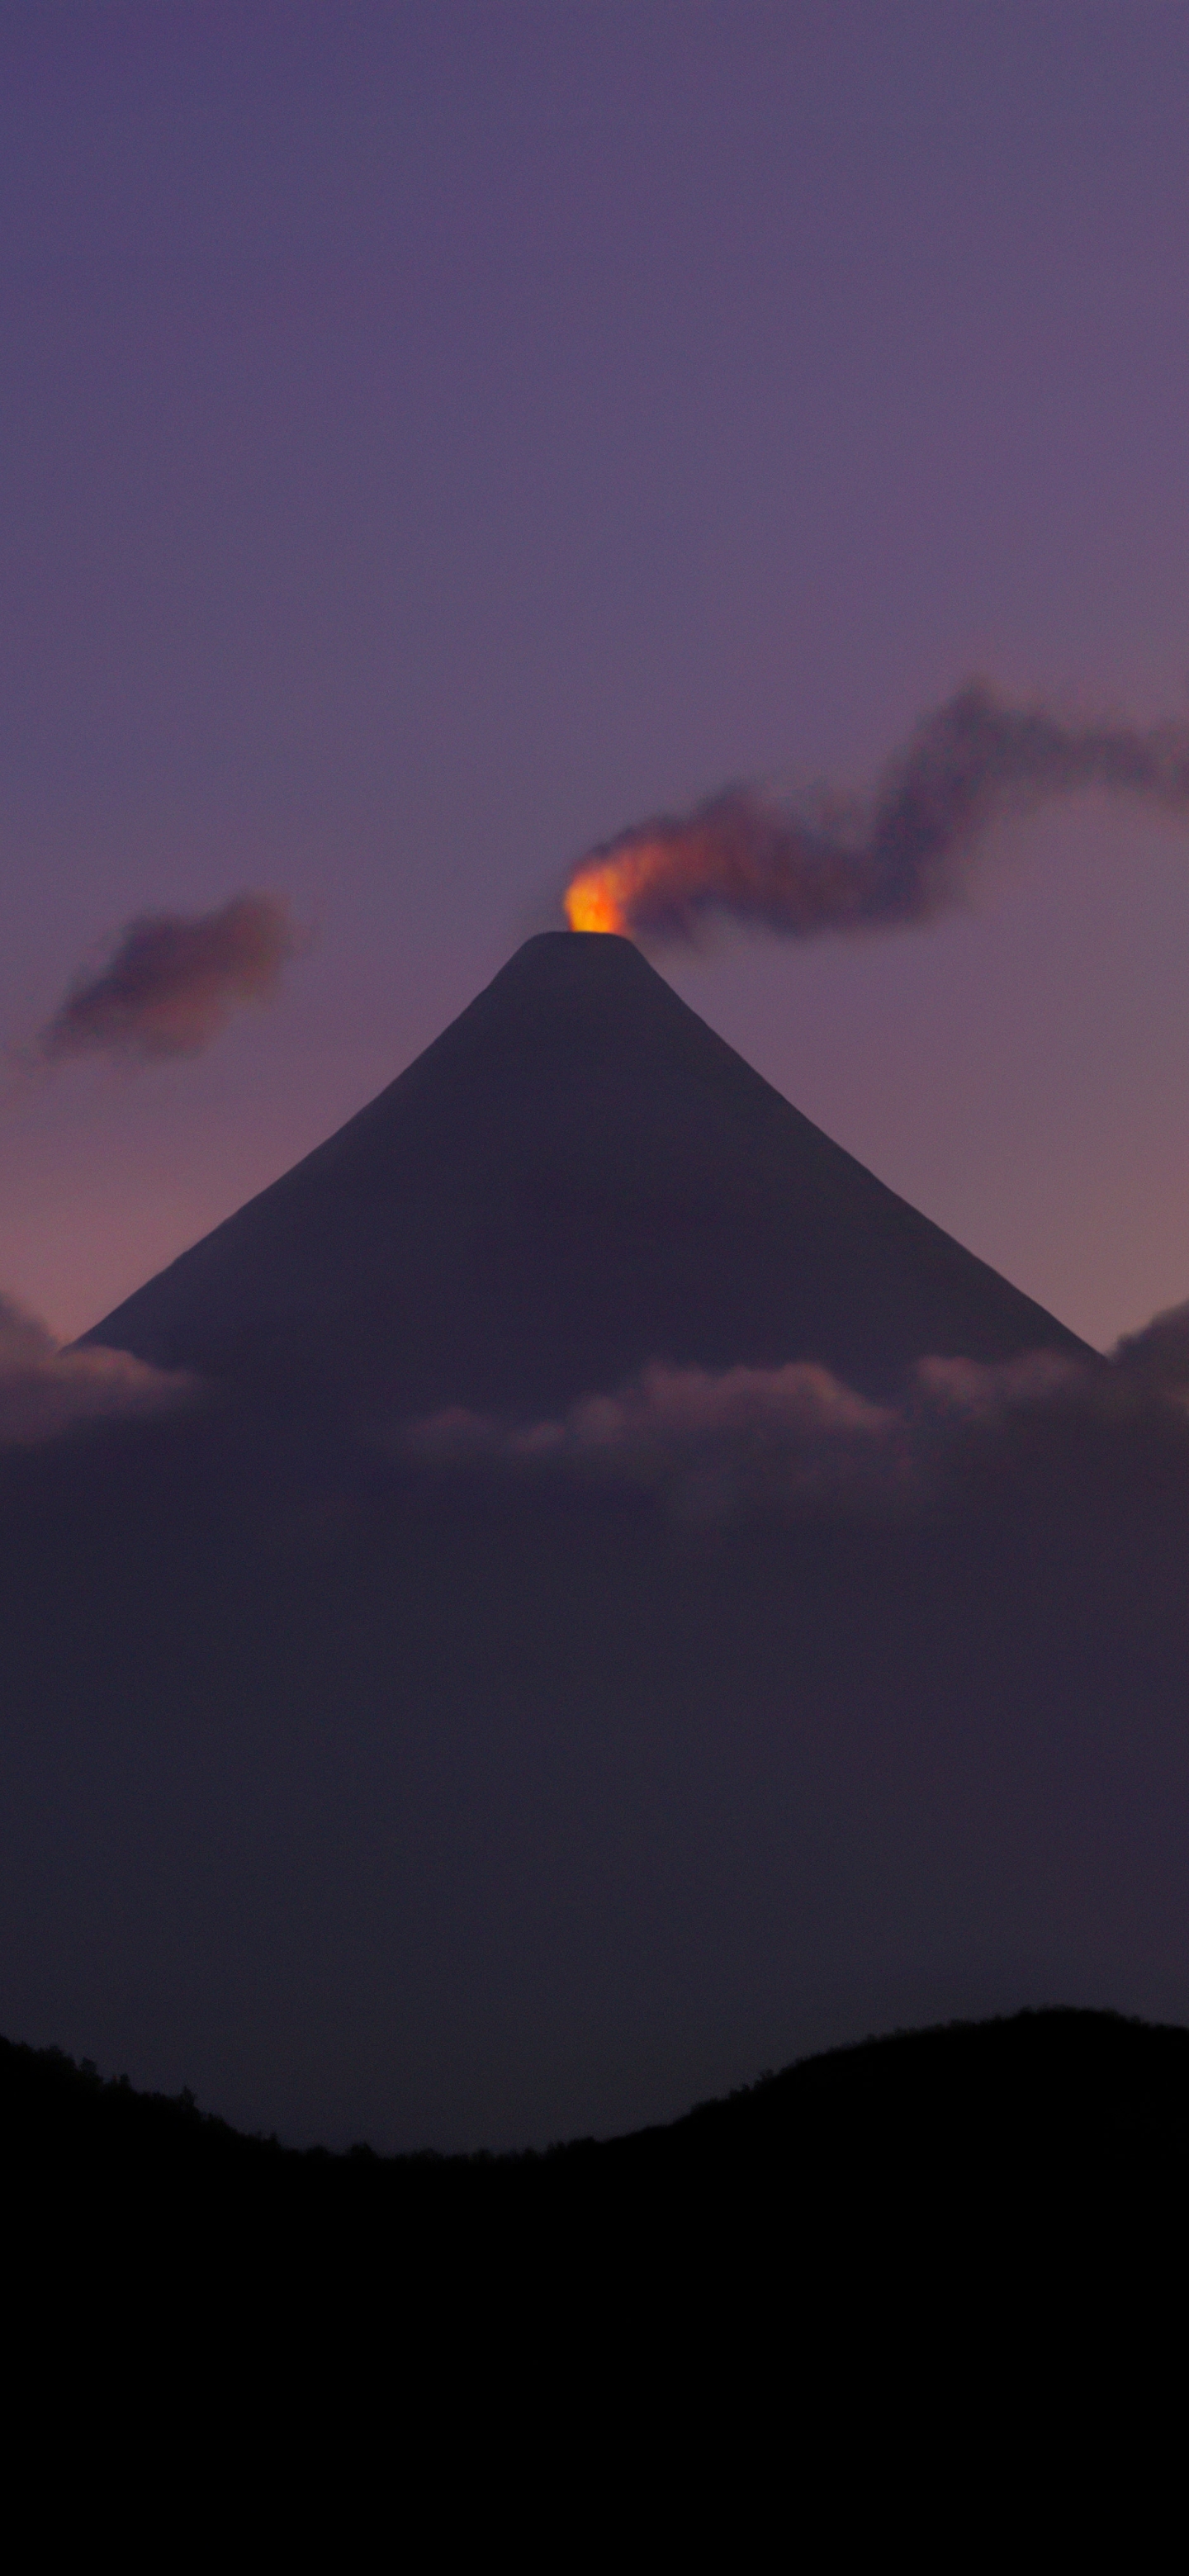 Smoke from the crater of Mount Mayon, Philippines by Per-Andre Hoffmann